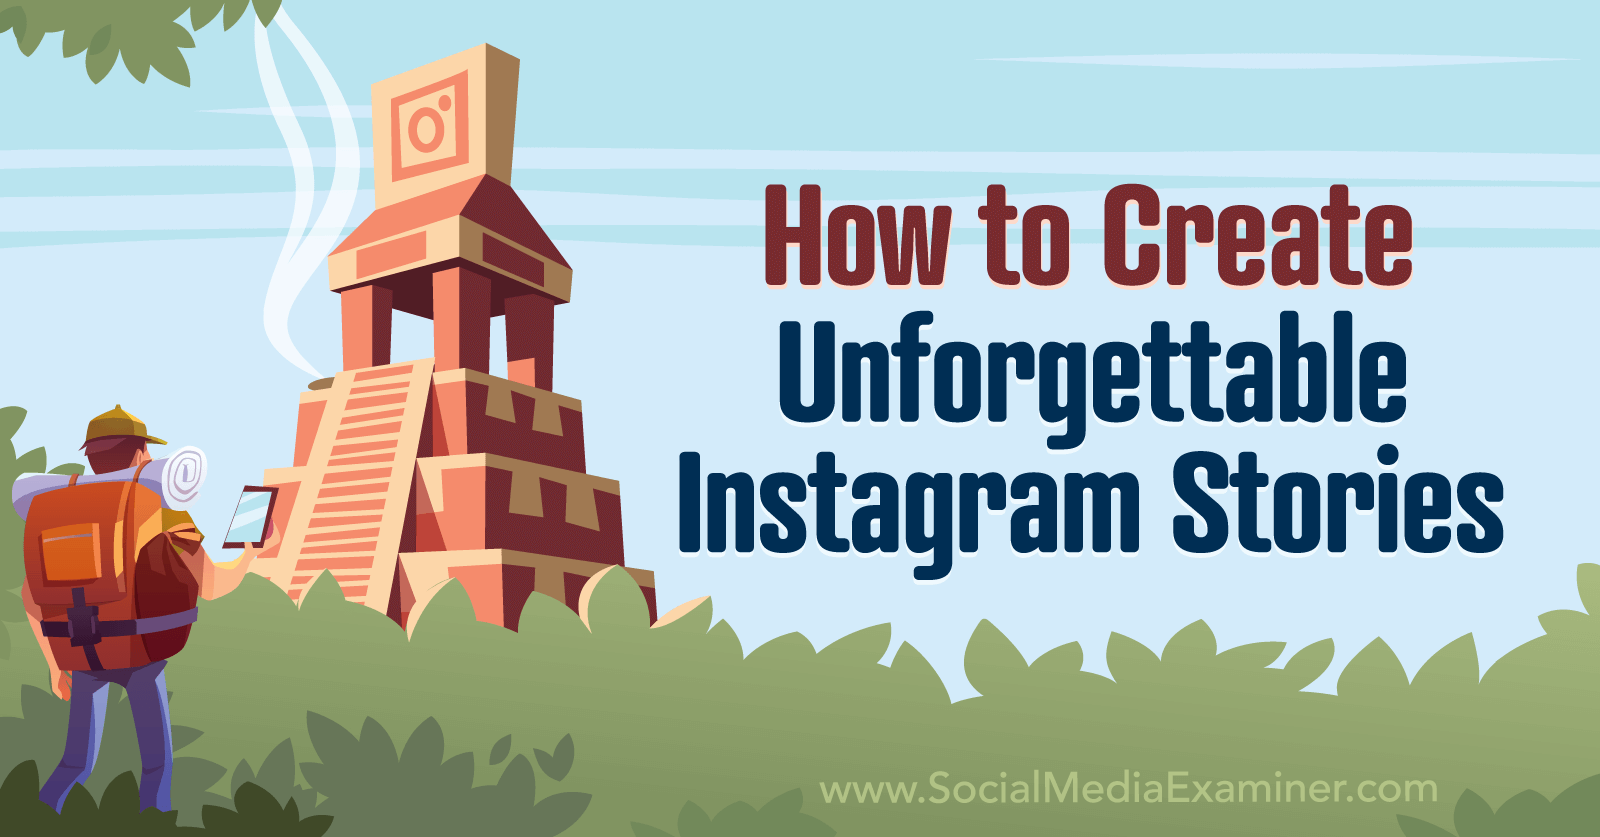 How to Create Unforgettable Instagram Stories-Social Media Examiner